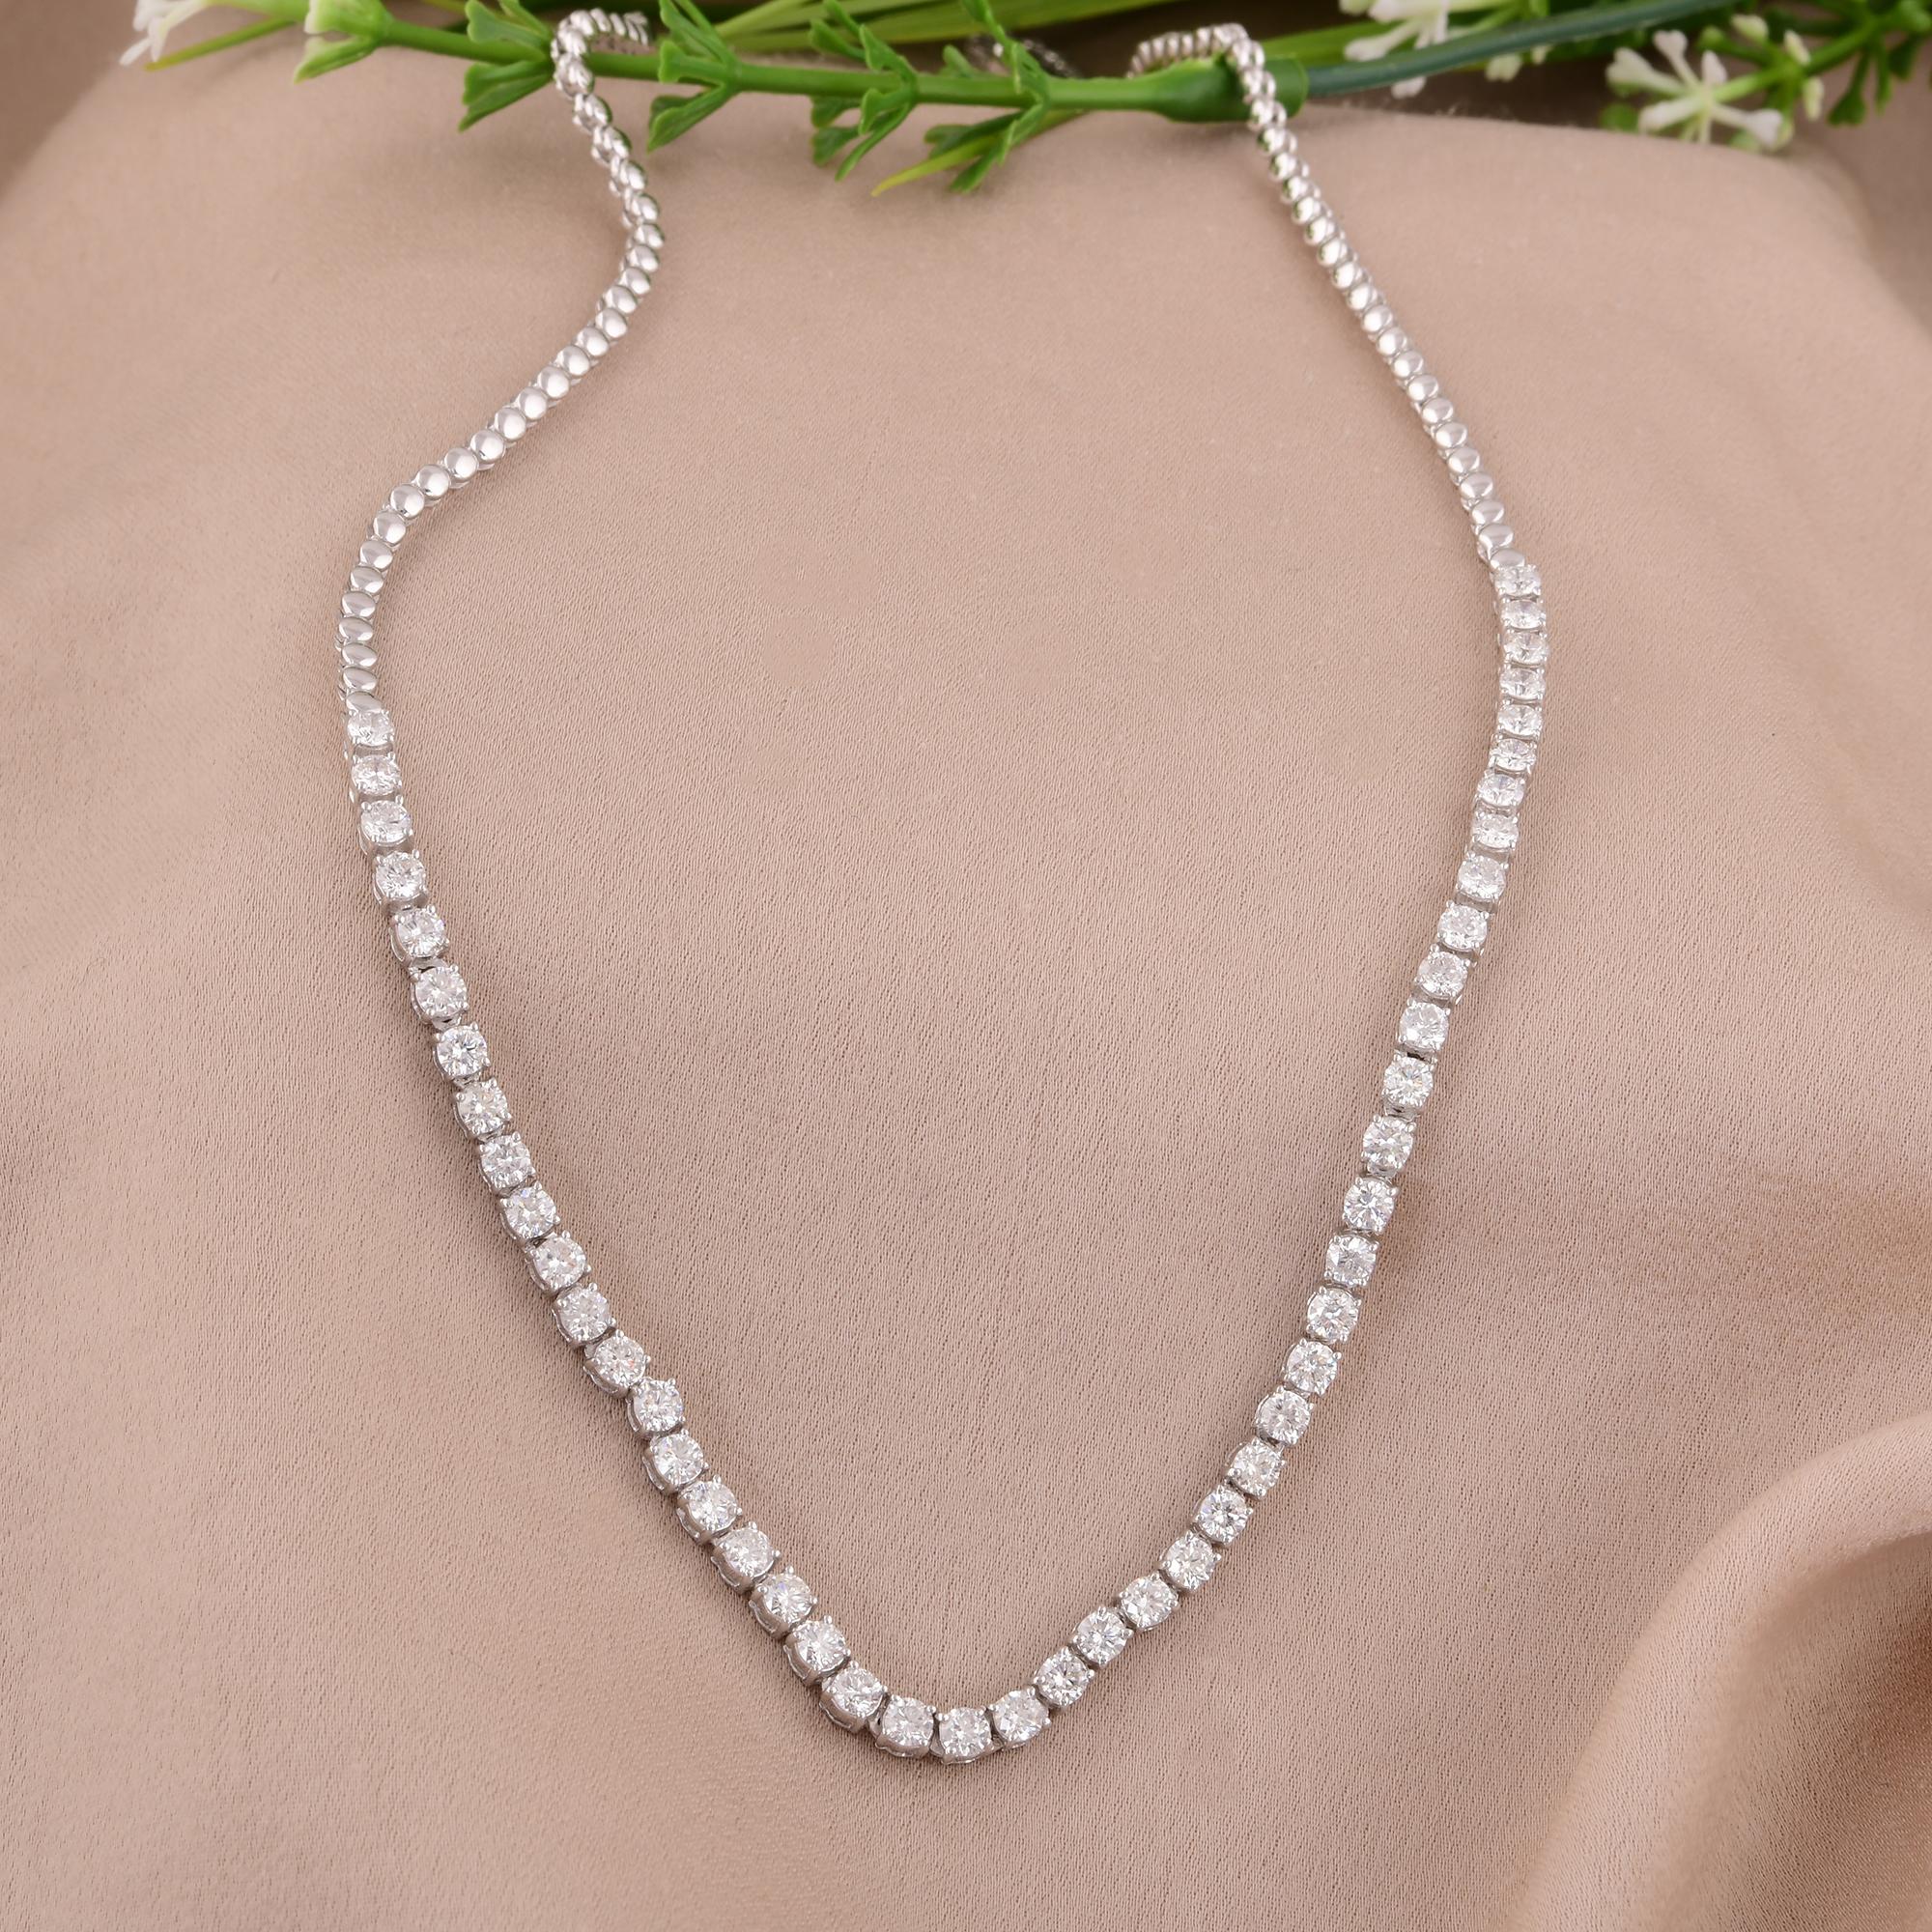 Women's Natural 3.81 Carat Round Diamond Necklace Solid 18 Karat White Gold Fine Jewelry For Sale